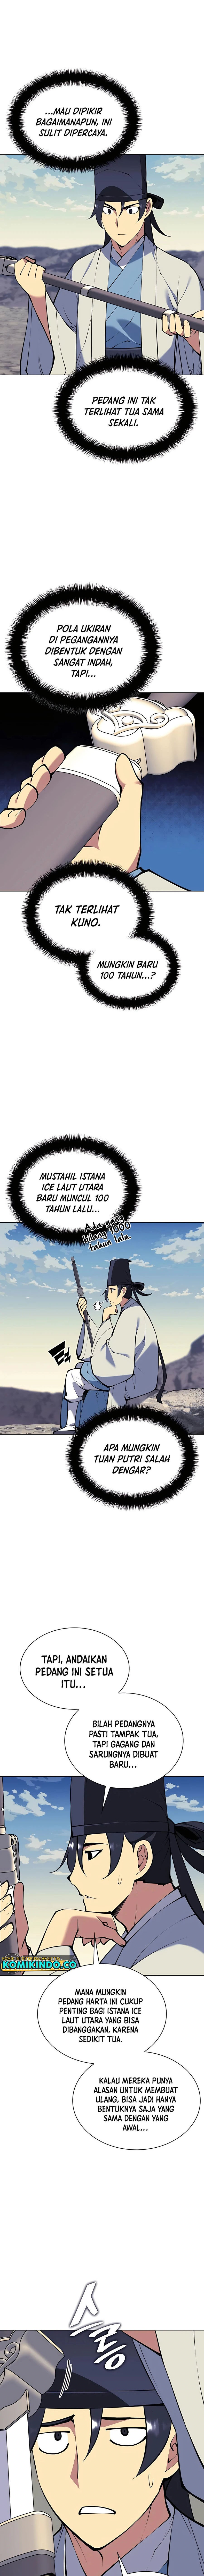 Records of the Swordsman Scholar Chapter 102